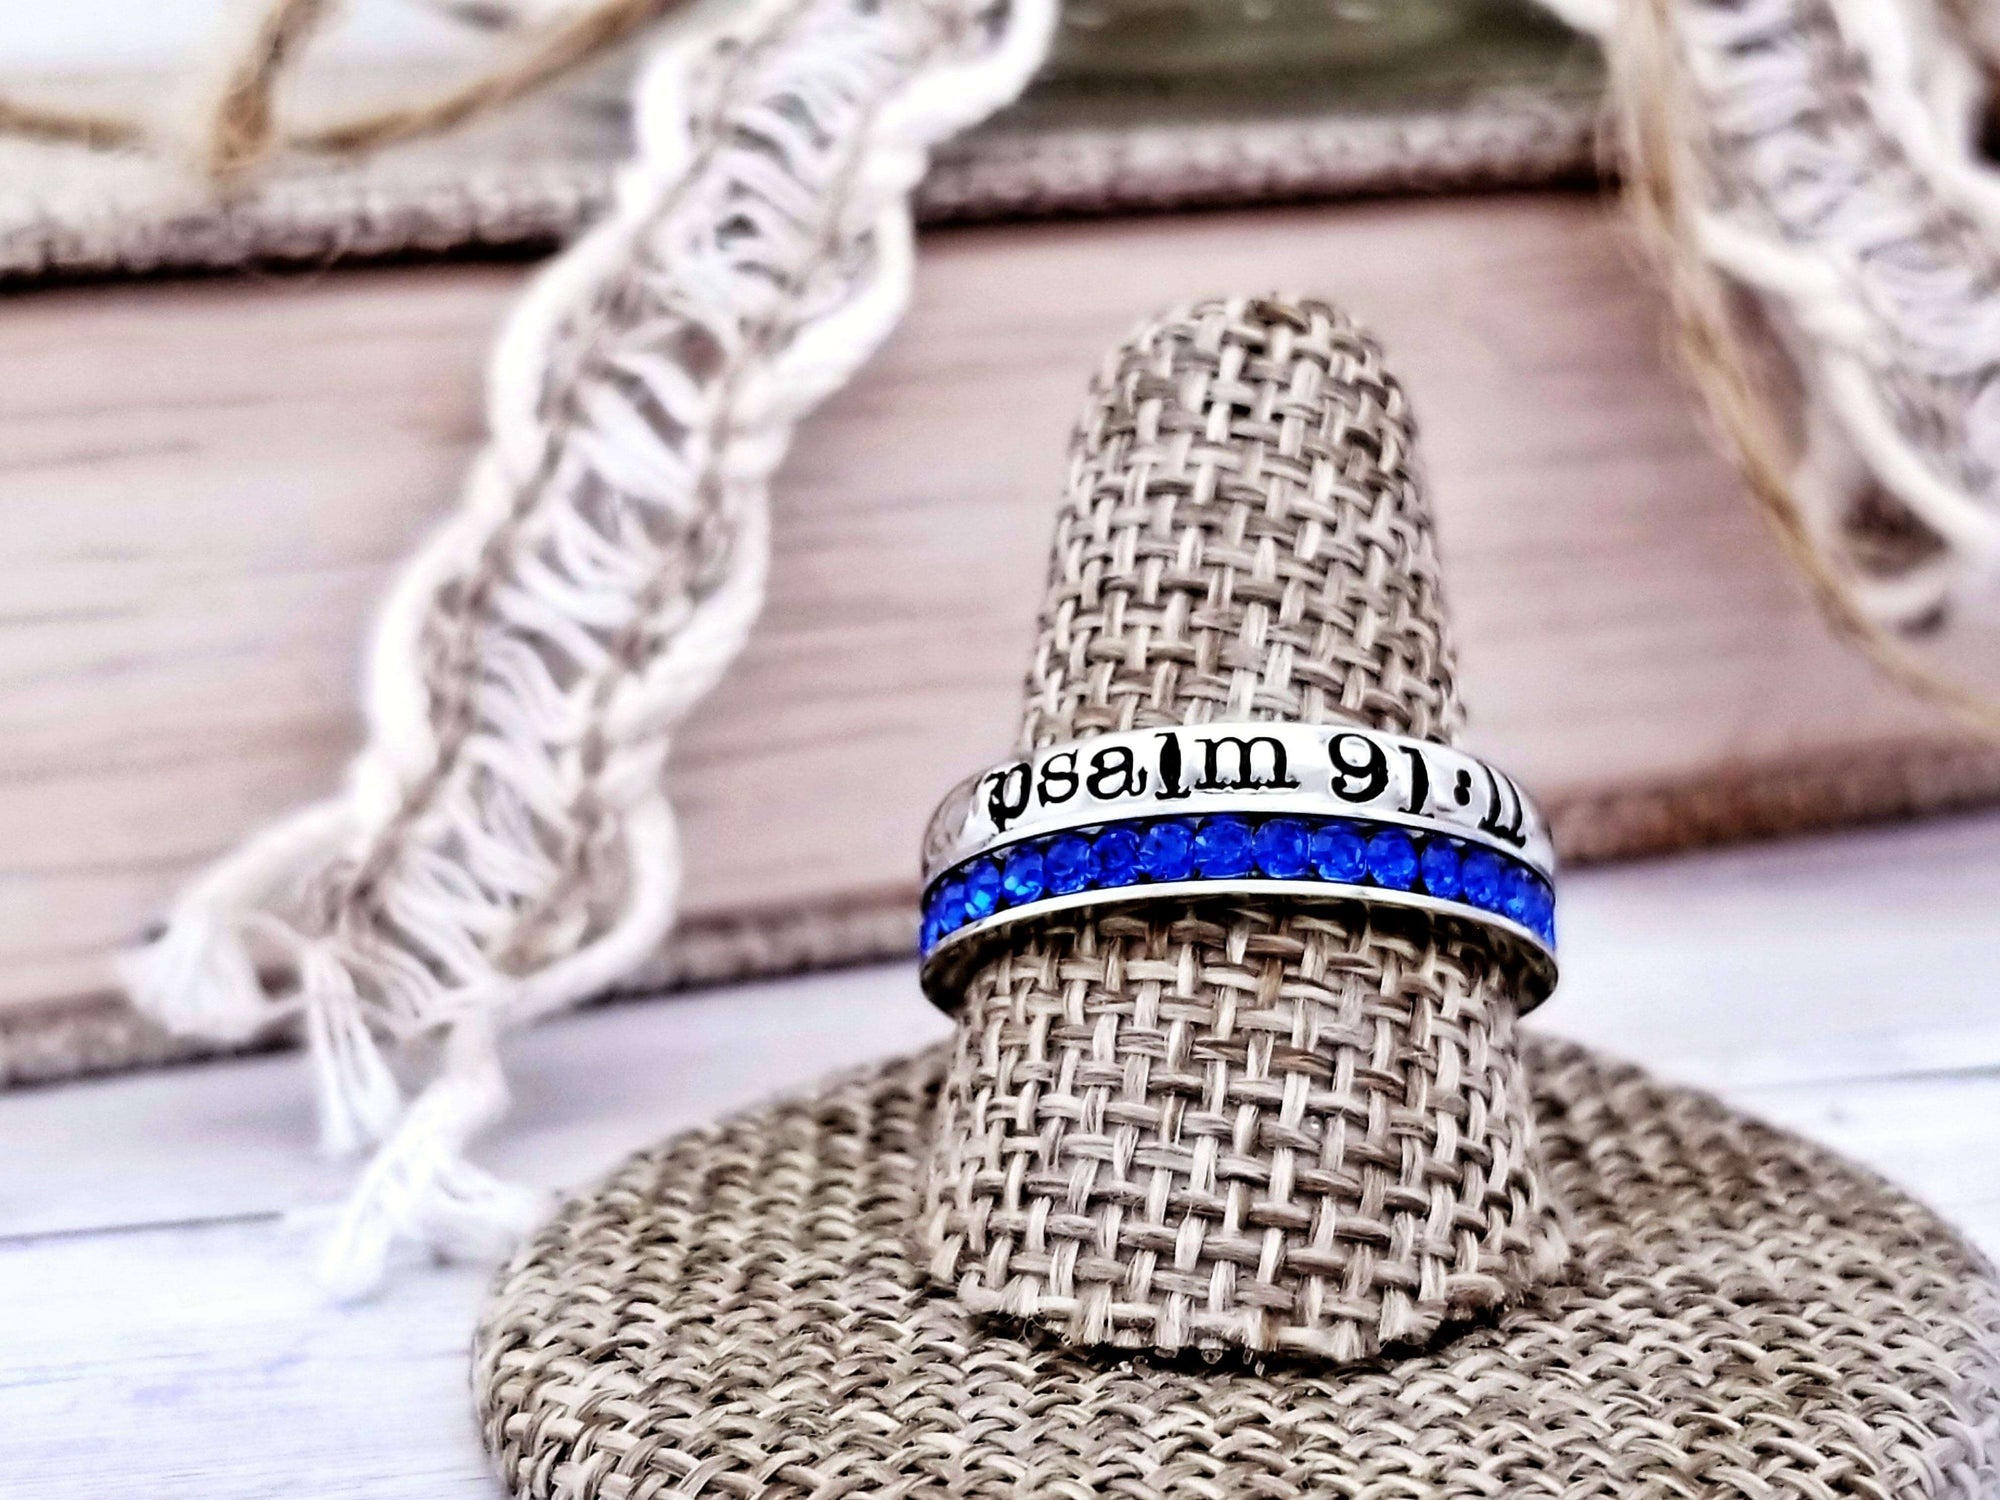 Corinthians Ring, Scripture Ring, Christian Jewelry, Psalm Ring, Scripture Jewelry, Inspirational Ring, Personalize Jewelry, Hand Stamped Ring, Stackable Ring